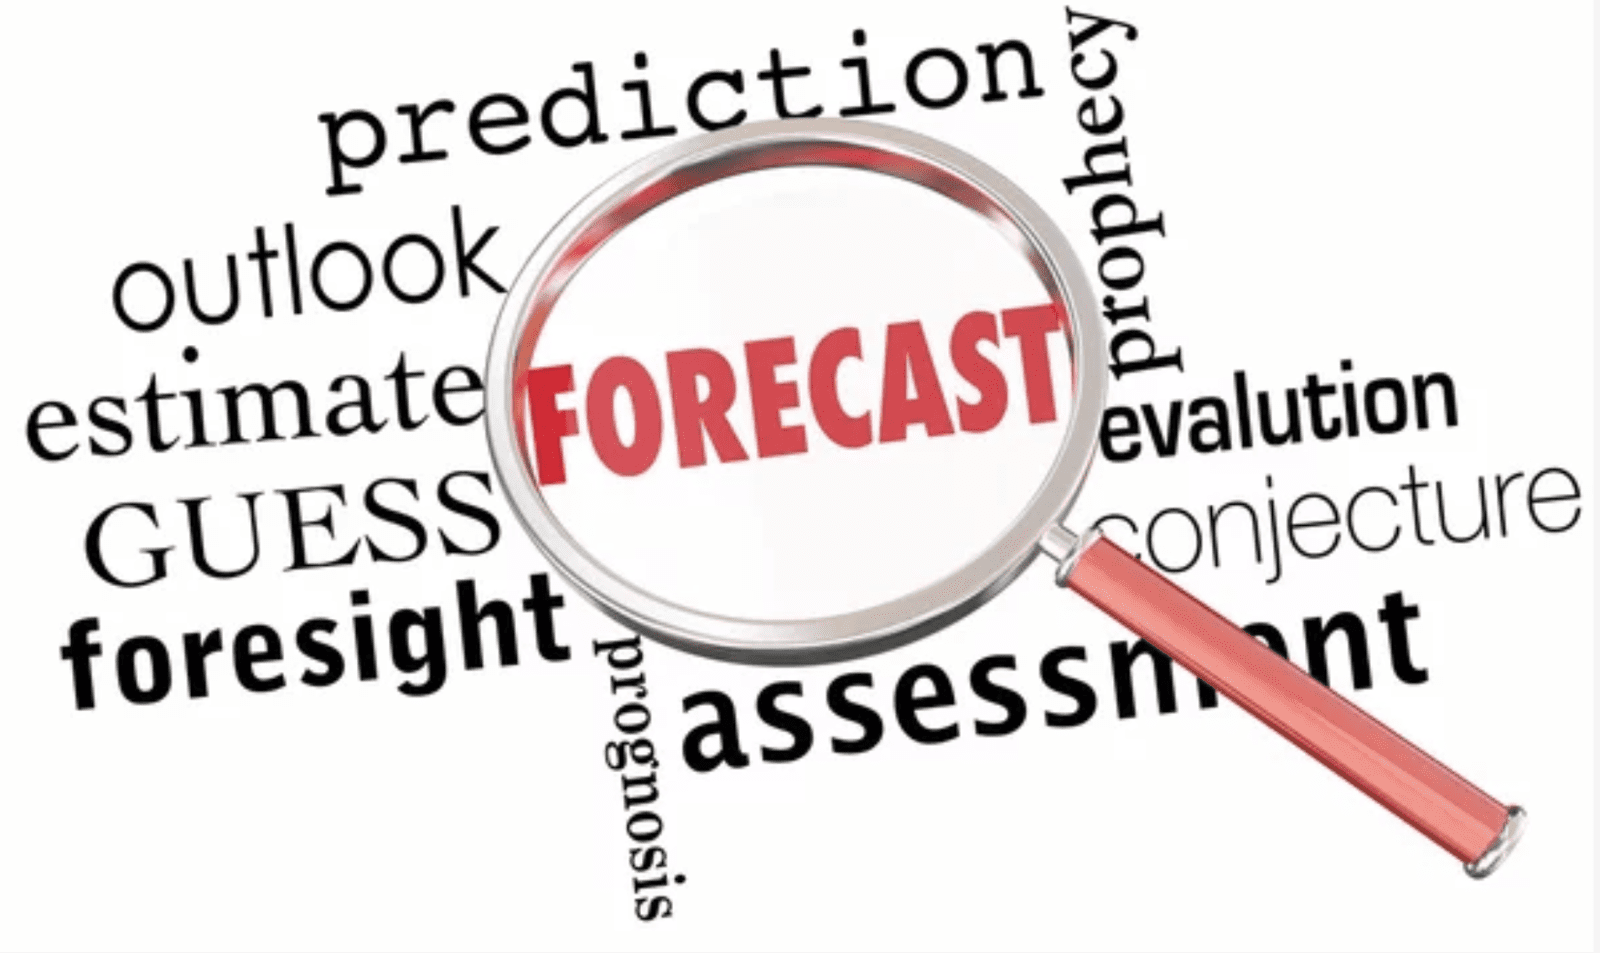 Better insights + better forecasting = more sales